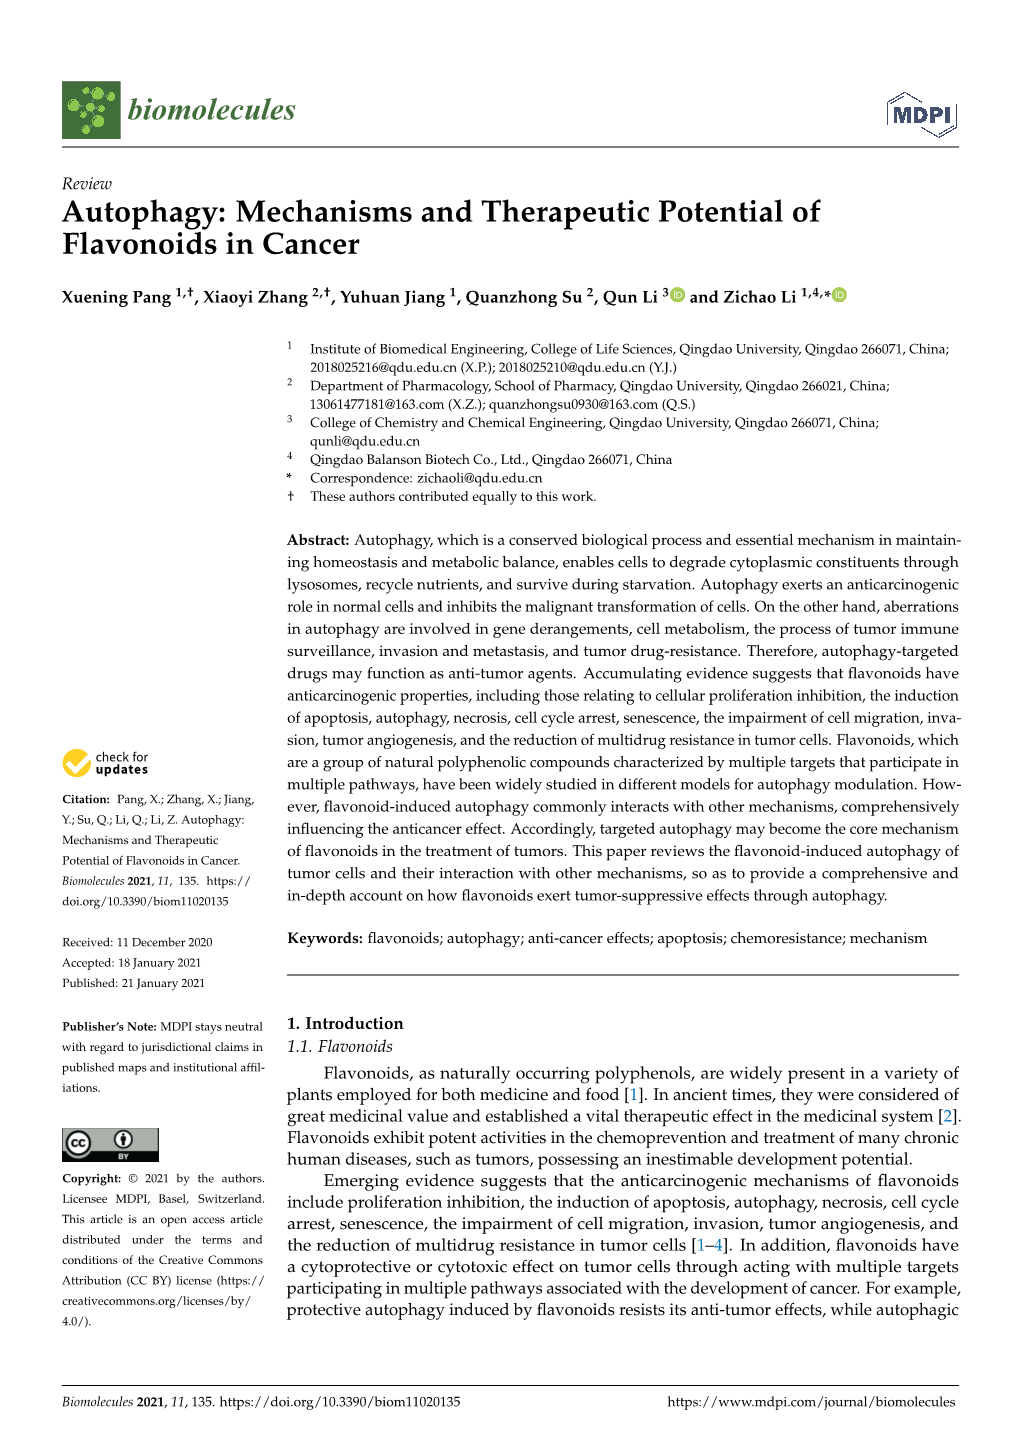 Autophagy: Mechanisms and Therapeutic Potential of Flavonoids in Cancer